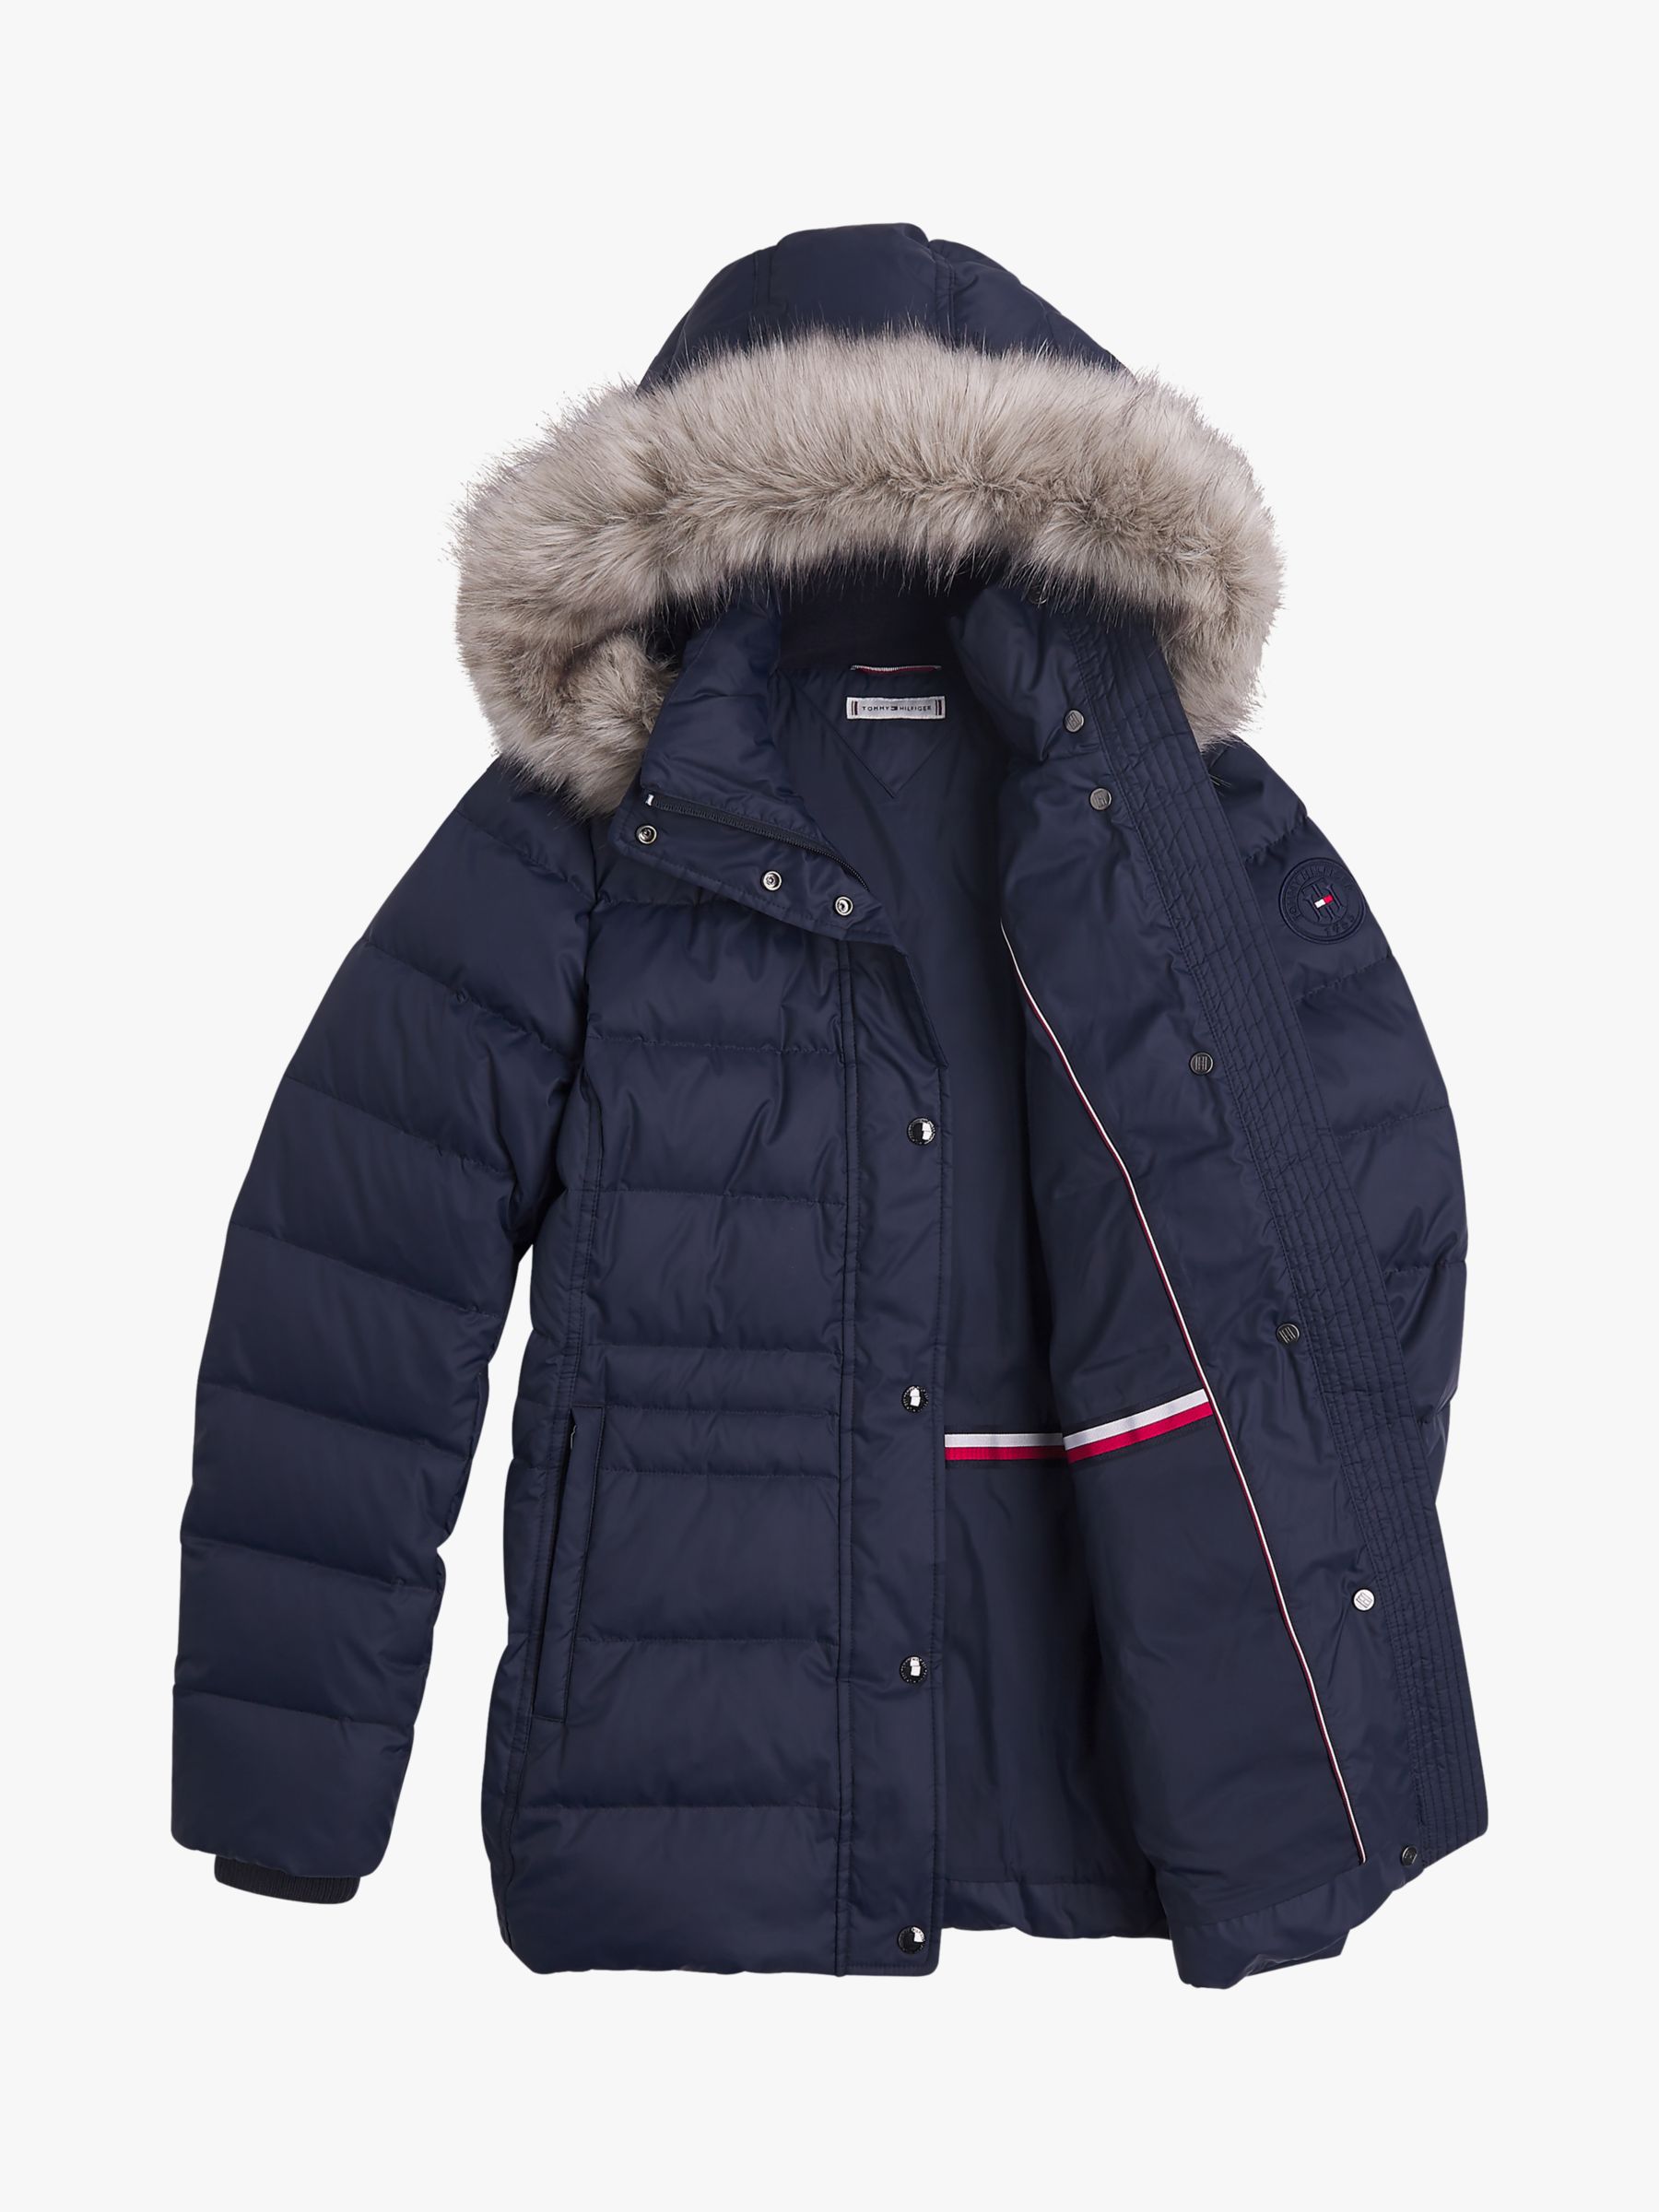 Tommy Hilfiger Tyra Quilted Jacket, Desert Sky at John Lewis & Partners